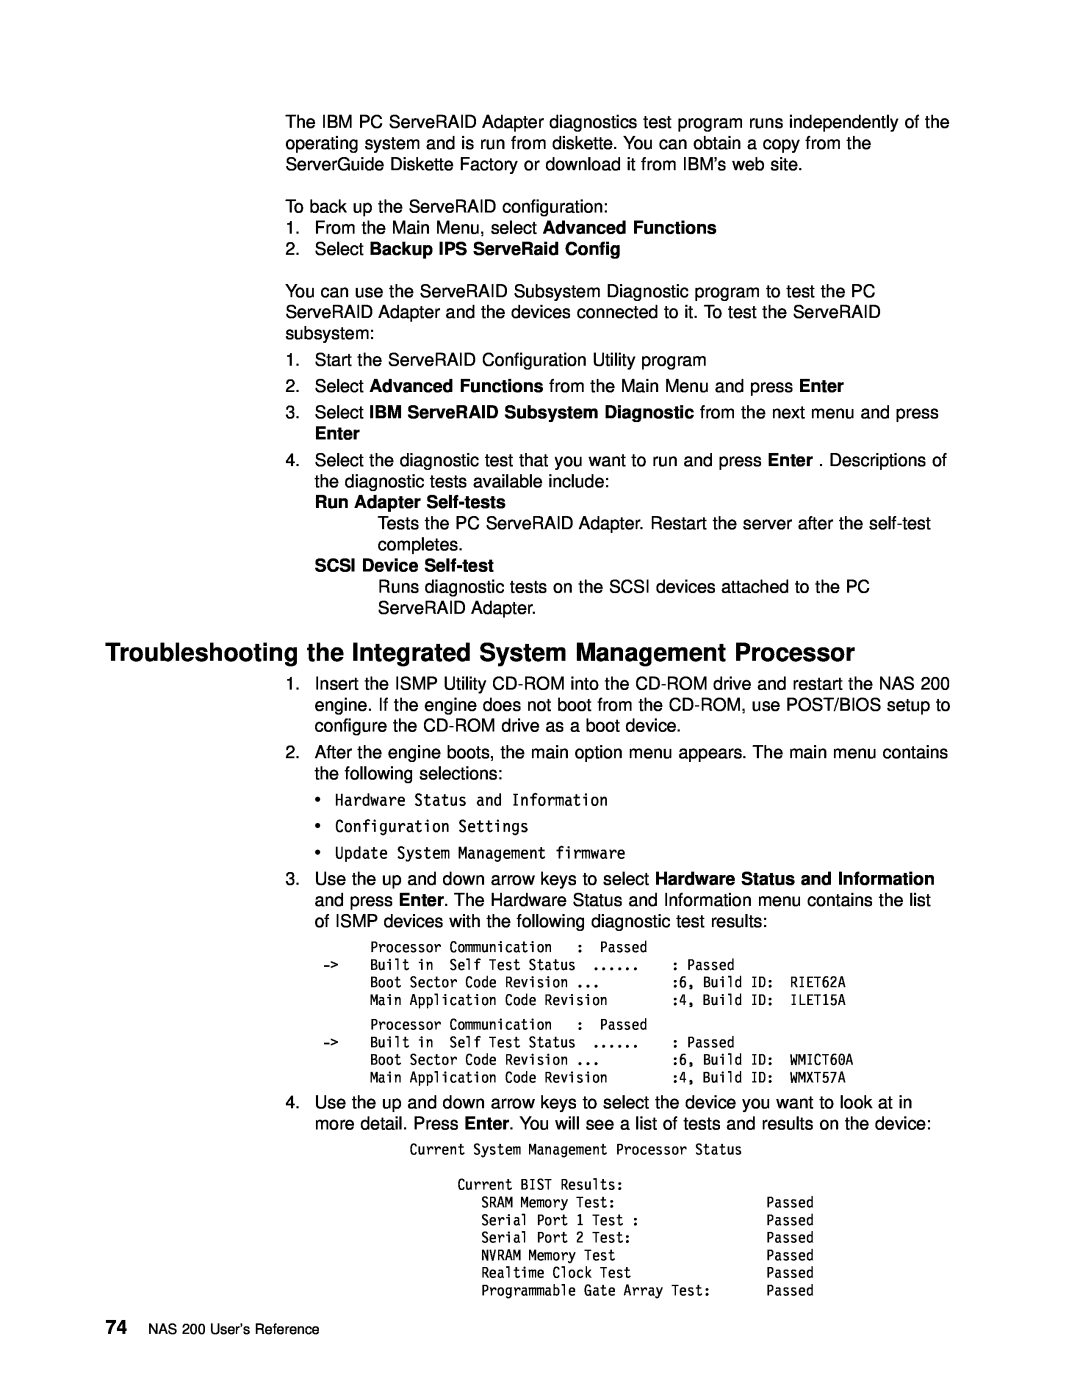 IBM 201 manual Troubleshooting the Integrated System Management Processor, Select Backup IPS ServeRaid Config, Enter 